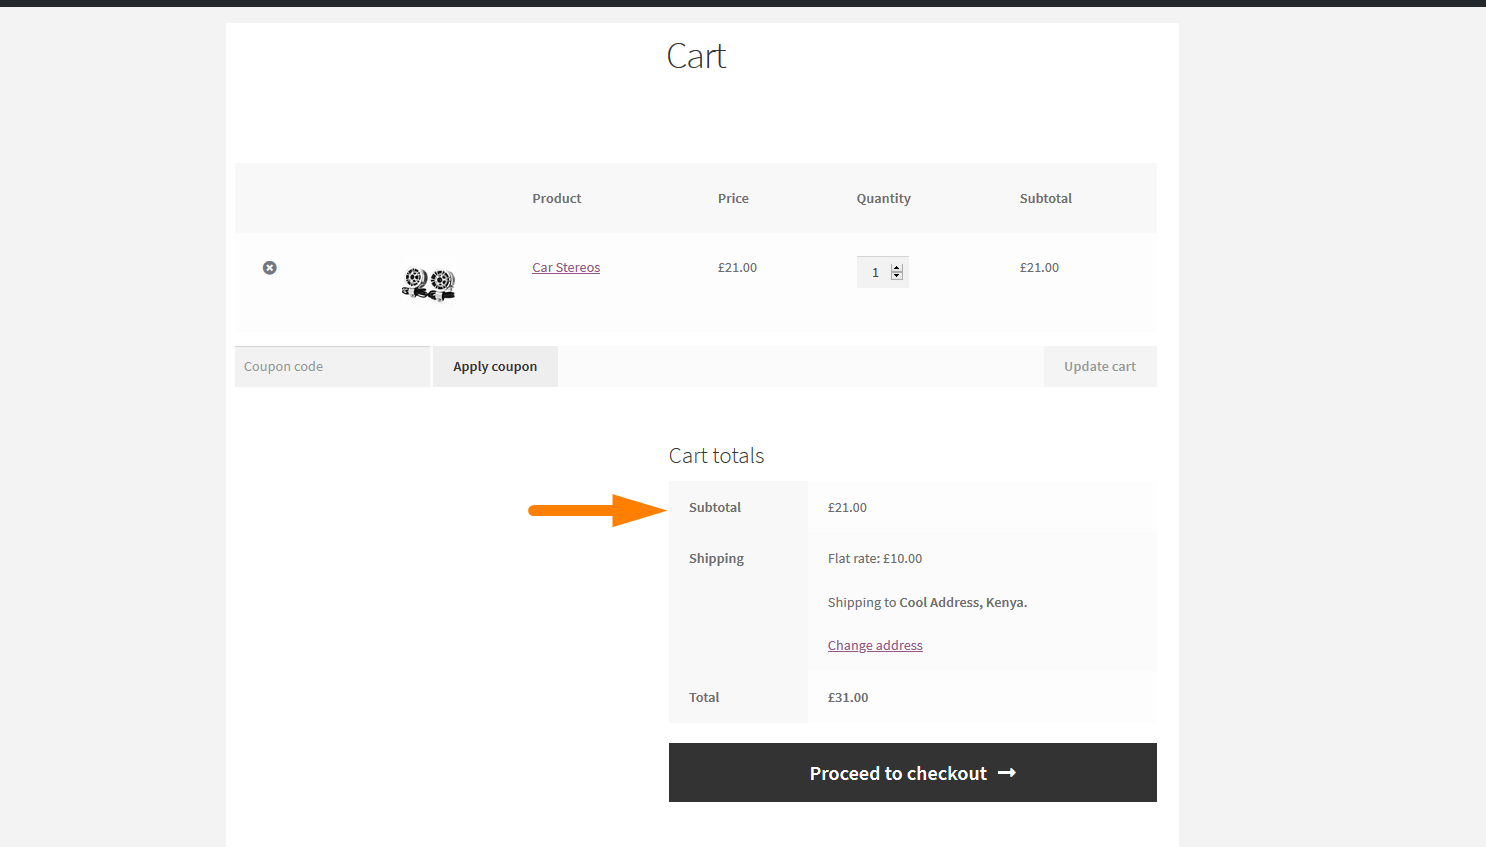 Nutrition plenty Inquire How to Hide Cart Subtotal In WooCommerce or Remove Subtotal Row